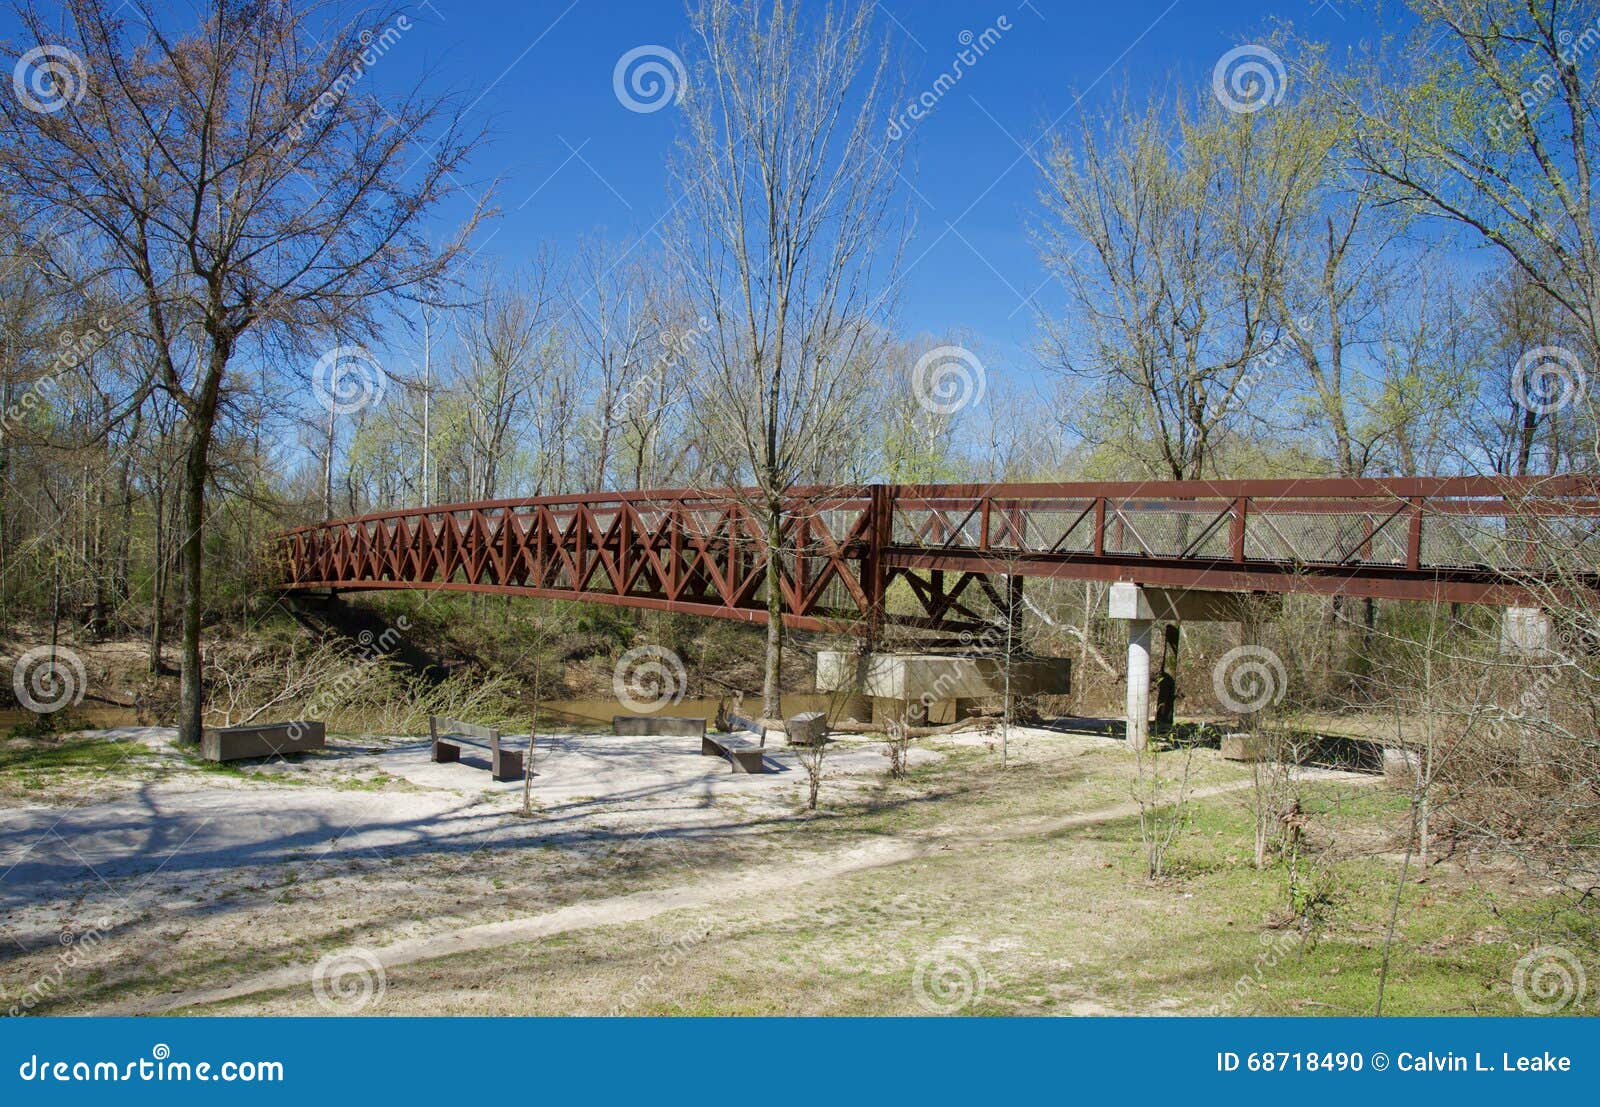 scenic view of a bridge over a wooded area.